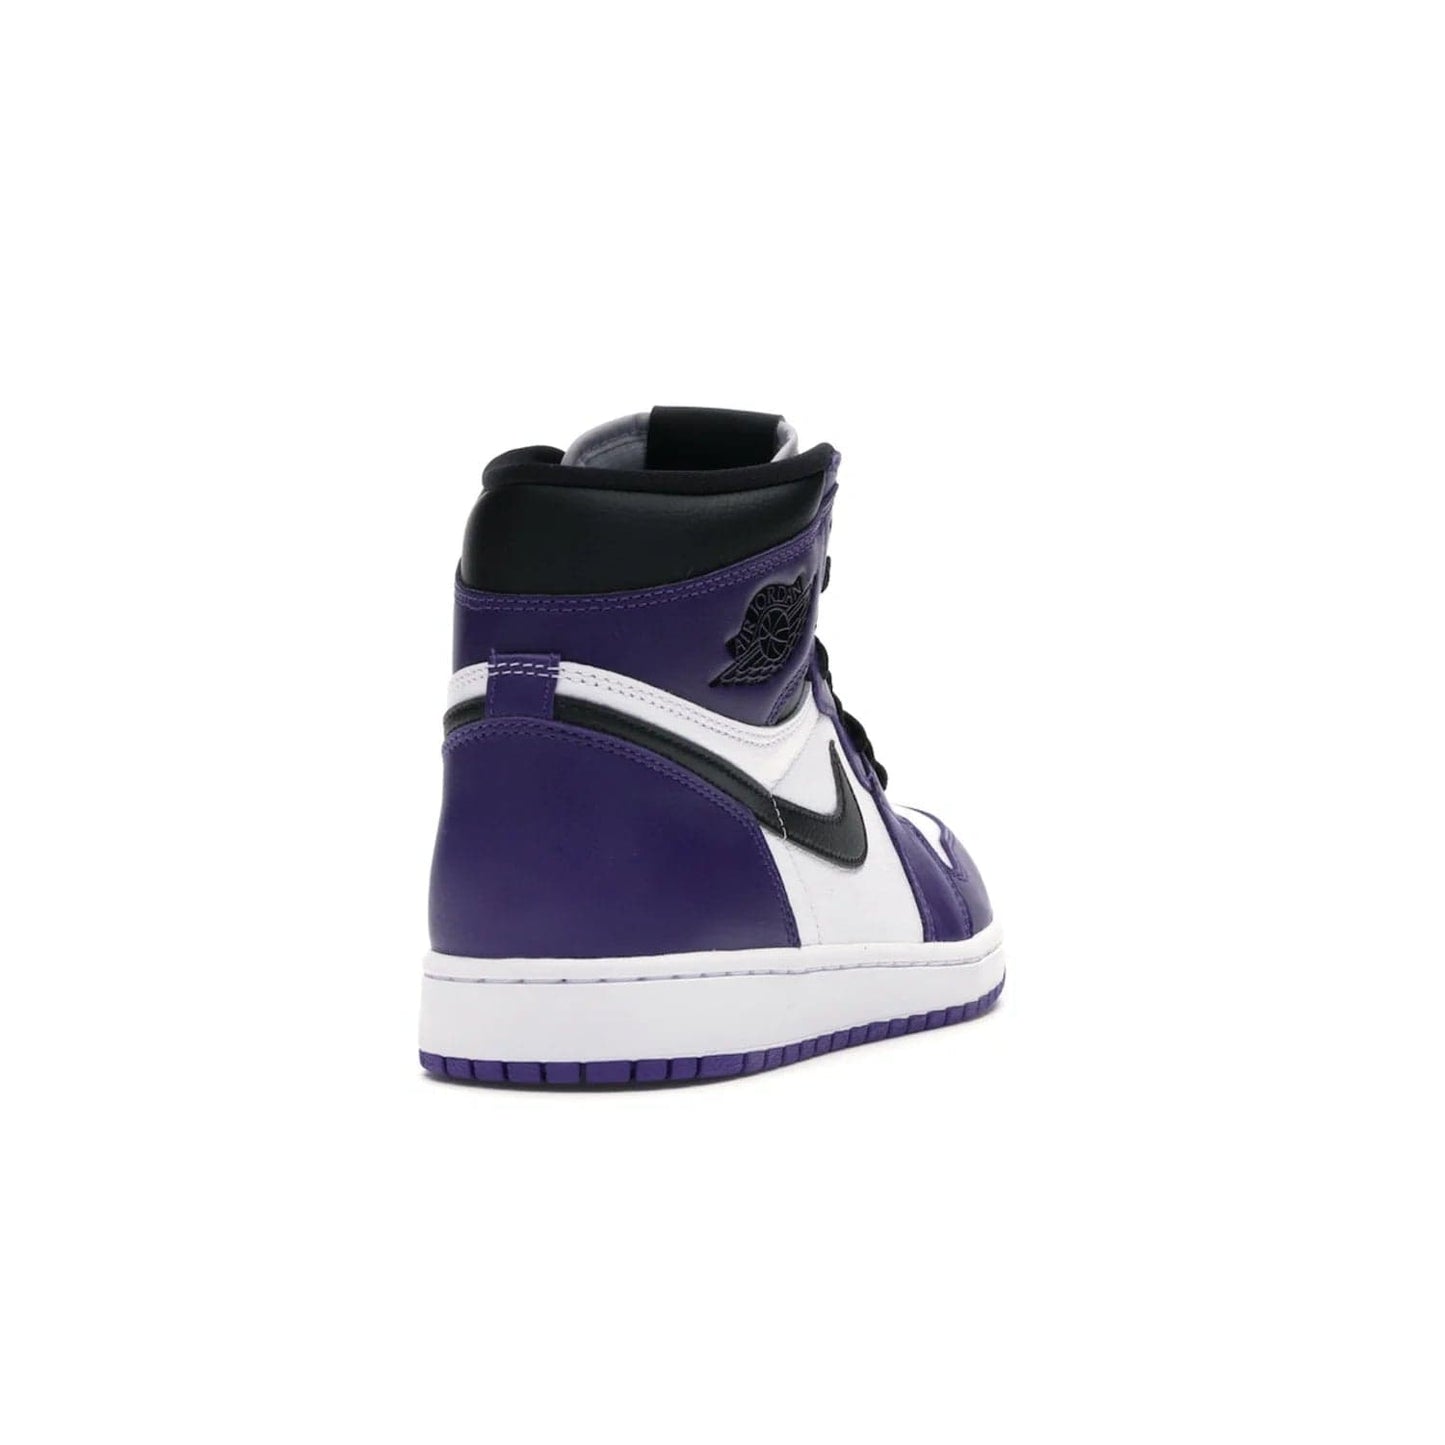 Jordan 1 Retro High Court Purple White - Image 30 - Only at www.BallersClubKickz.com - Grab the classic Jordan 1 Retro High Court Purple White and add major flavor to your collection. White leather upper with Court Purple overlays and Swoosh logo. White midsole and purple outsole. Get yours and rep your Jordan Brand.